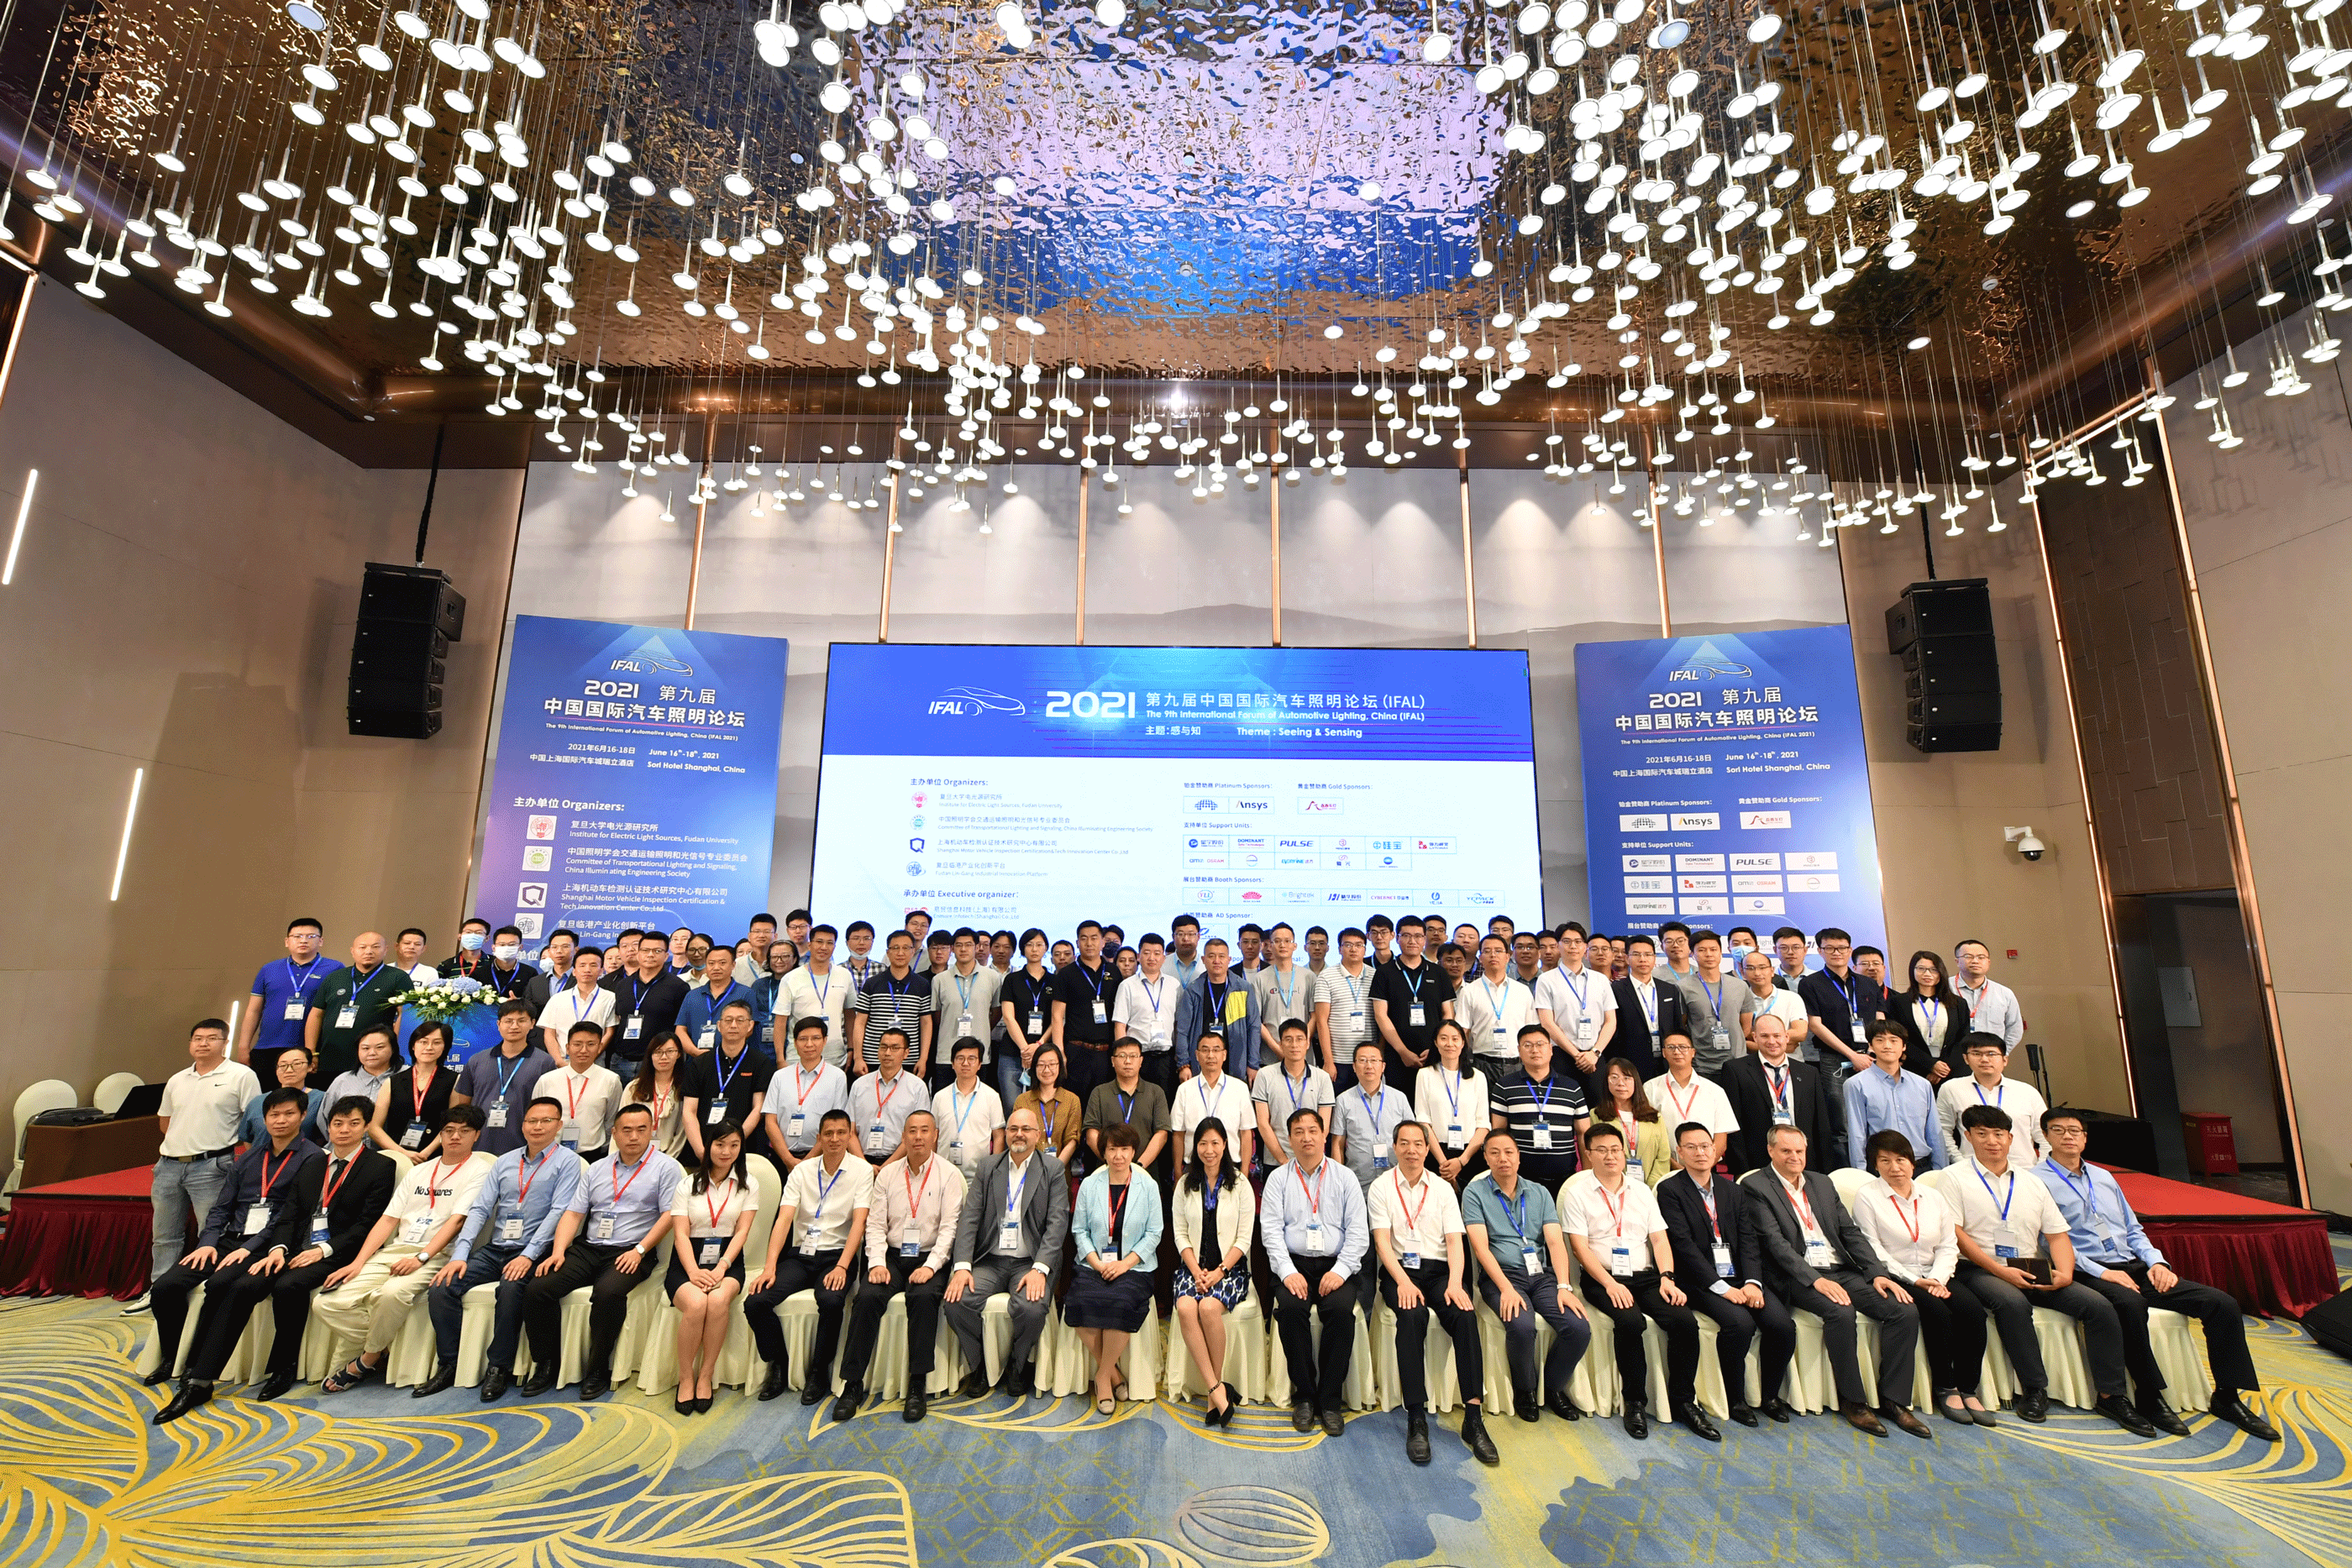 Report on the 9th International Forum on Automotive Lighting (IFAL2021) Conference